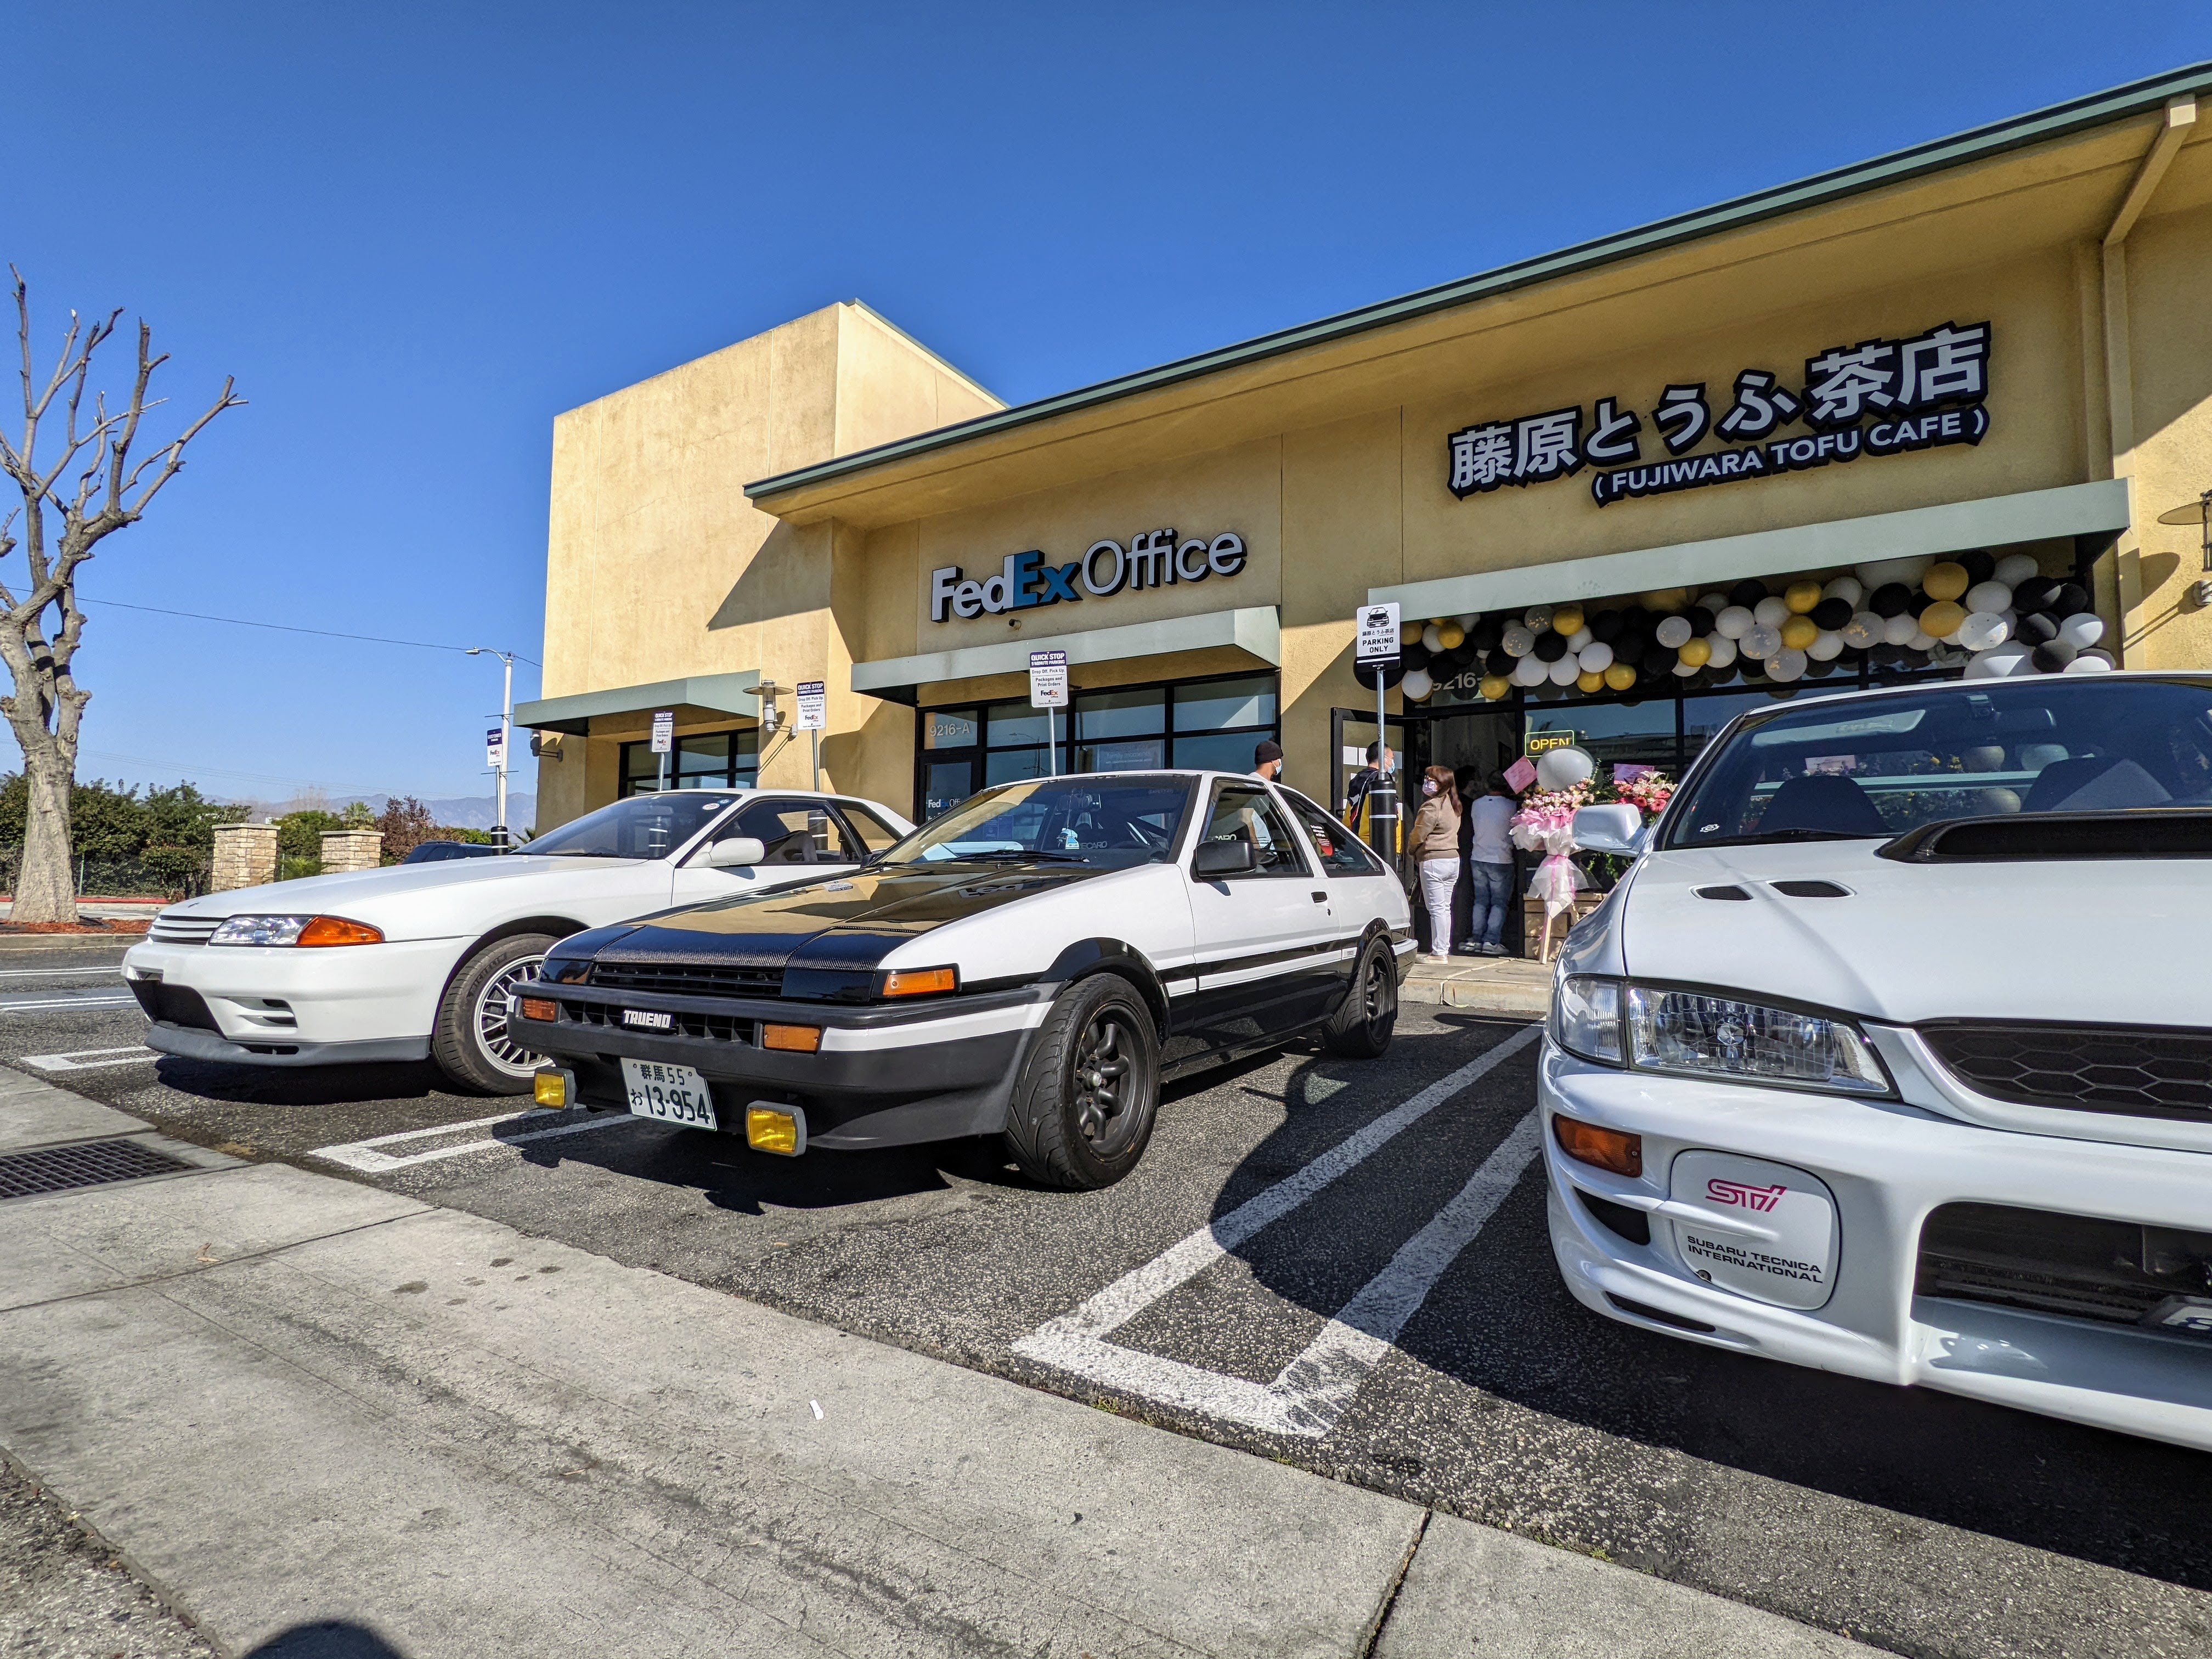 Outside Fujiwara Tofu Cafe in El Monte, with a Toyota Corolla Sprinter Trueno “AE86” parked in front.